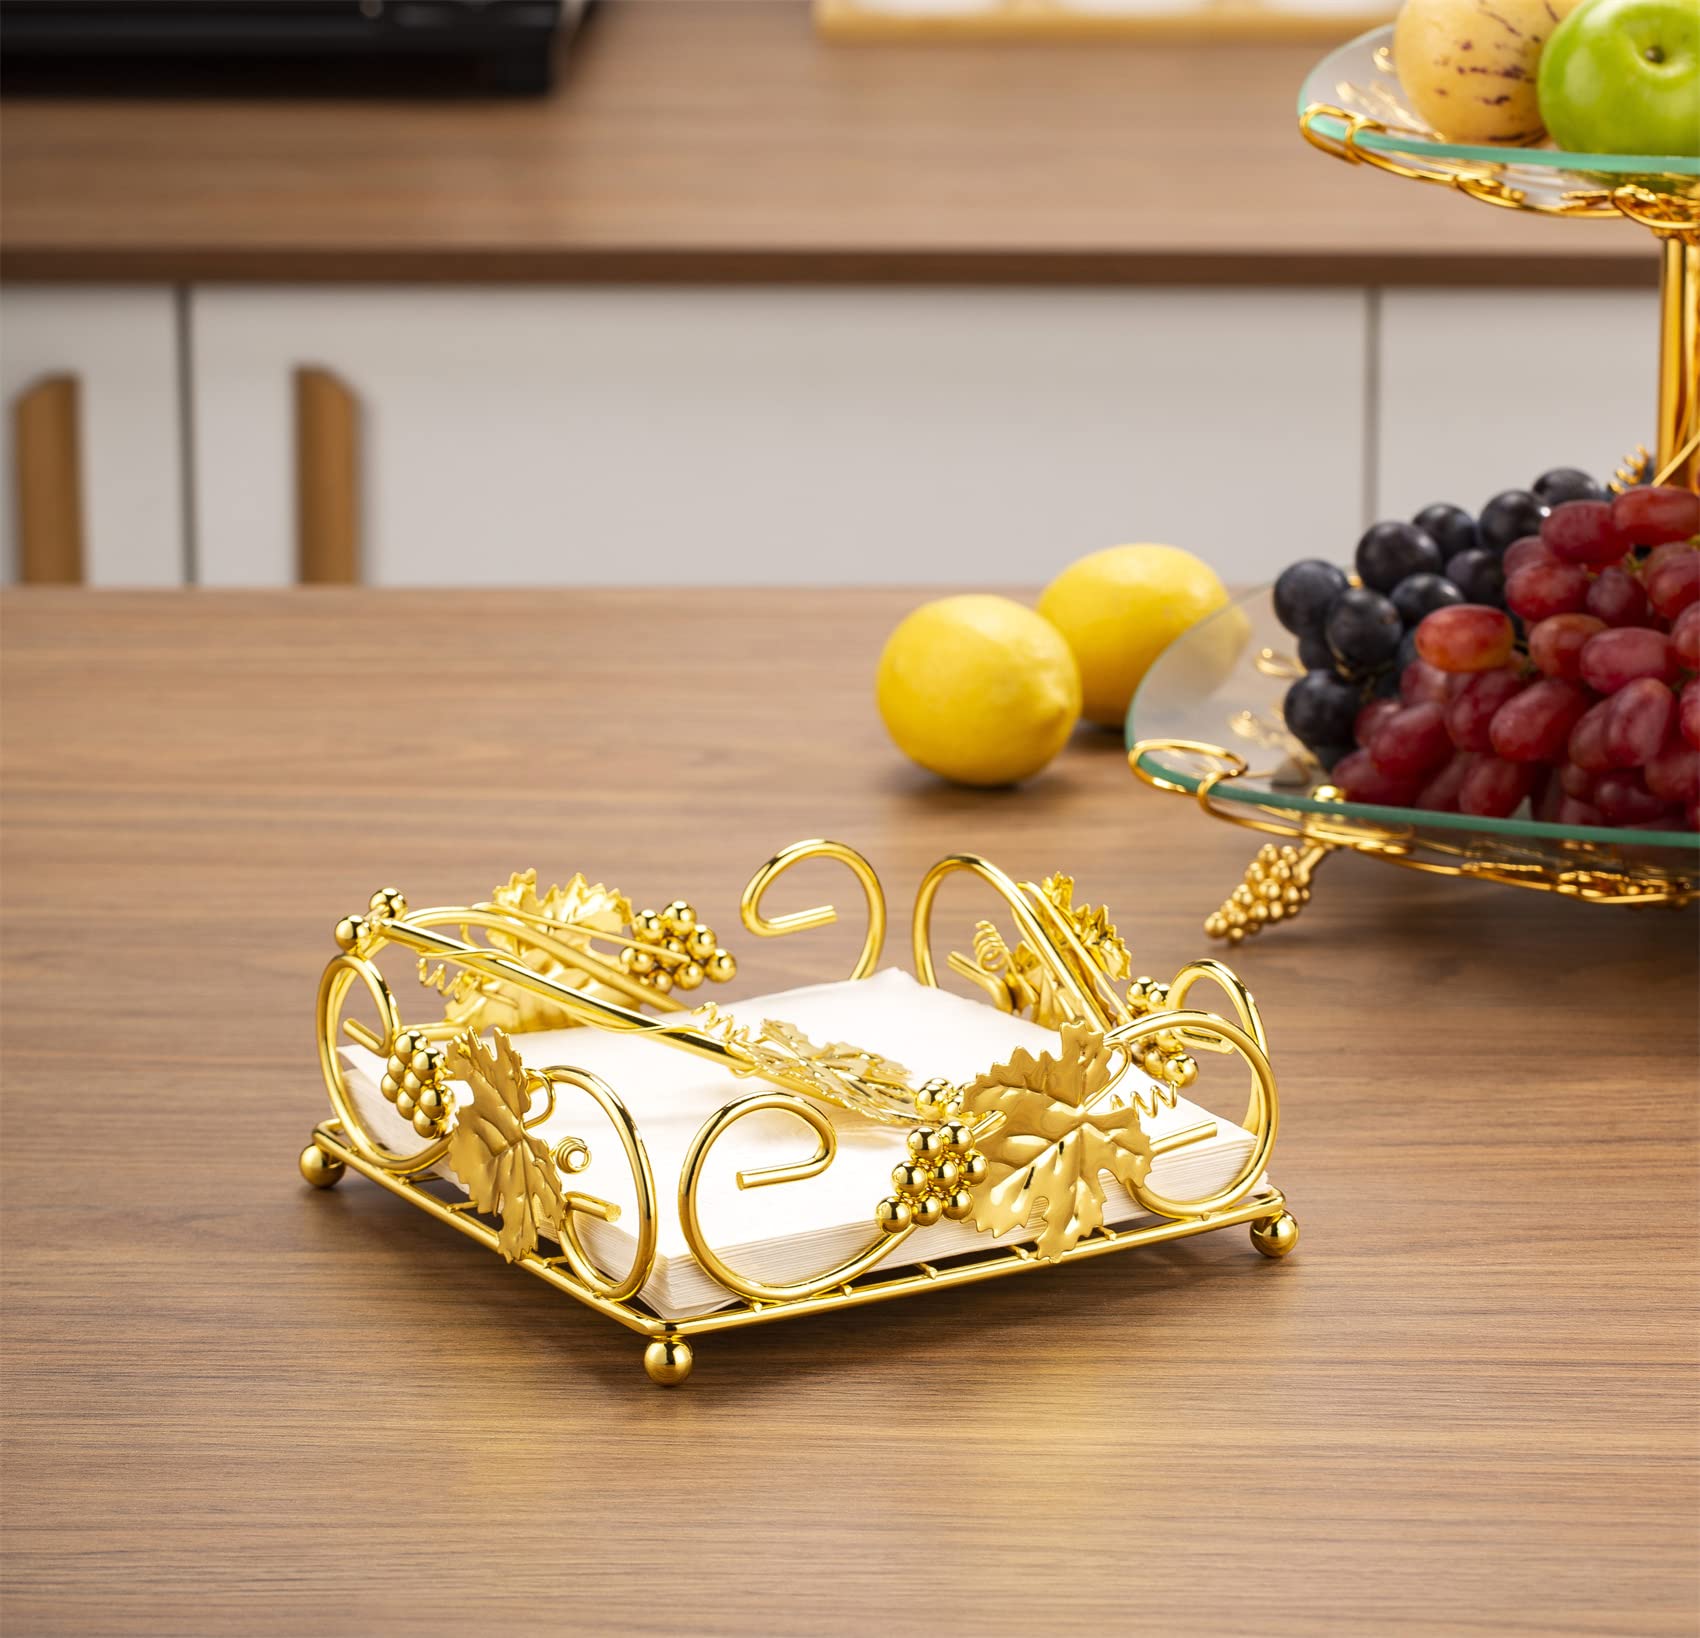 Flat Napkin Holder for Table Gold With Weight Arm for Kitchen Courtertops Dinning Table Grape Leaf Modern Tissue Dispenser Stainless Steel Gilding (7" L X 7" W X 2.5" H)